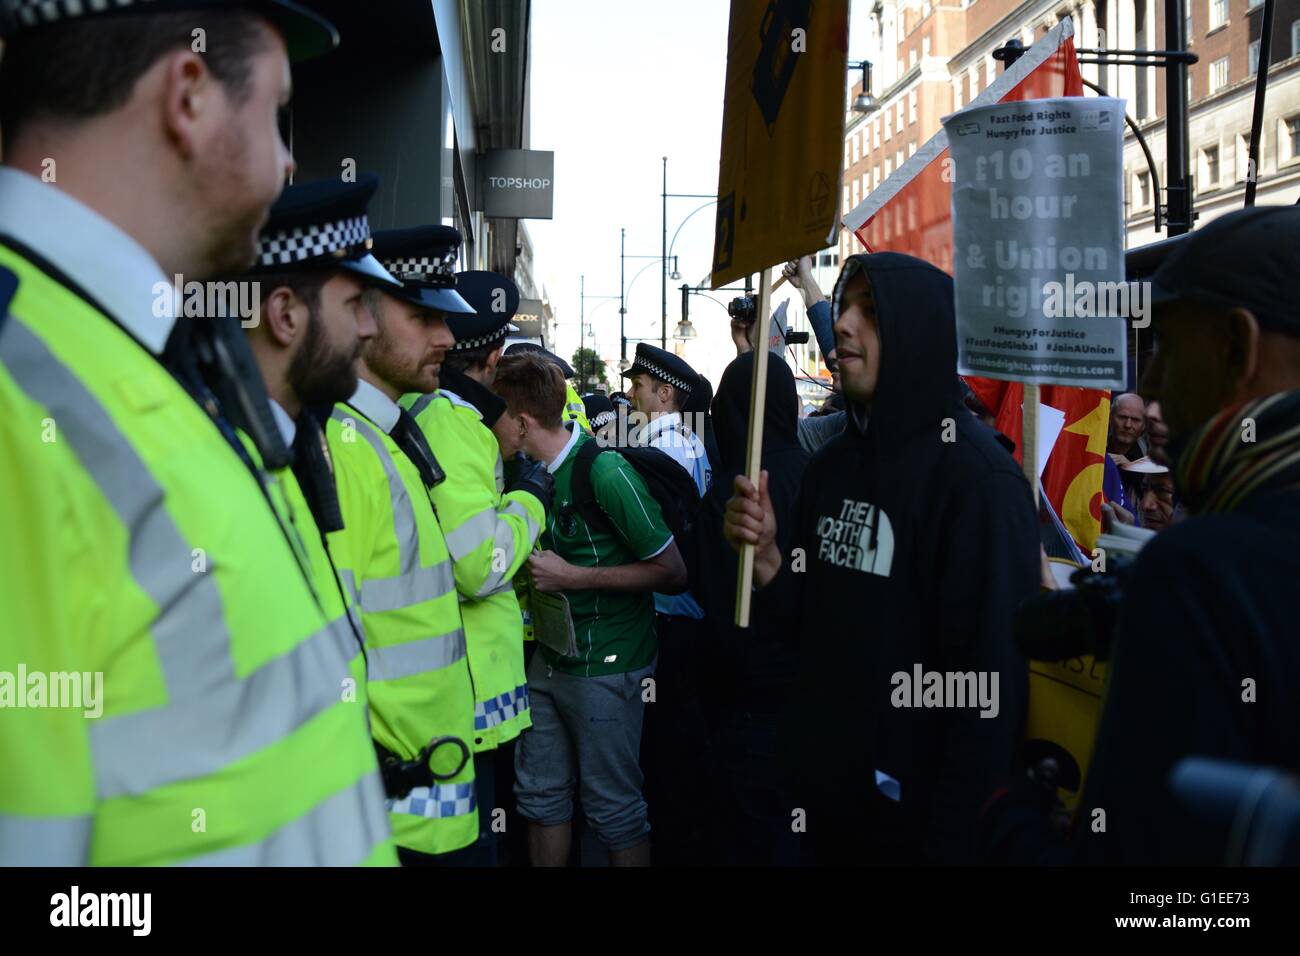 London, UK. 14th May 2016. Protesters try to storm another Topshop store following previous clashes Credit: Marc Ward/Alamy Live News Stock Photo